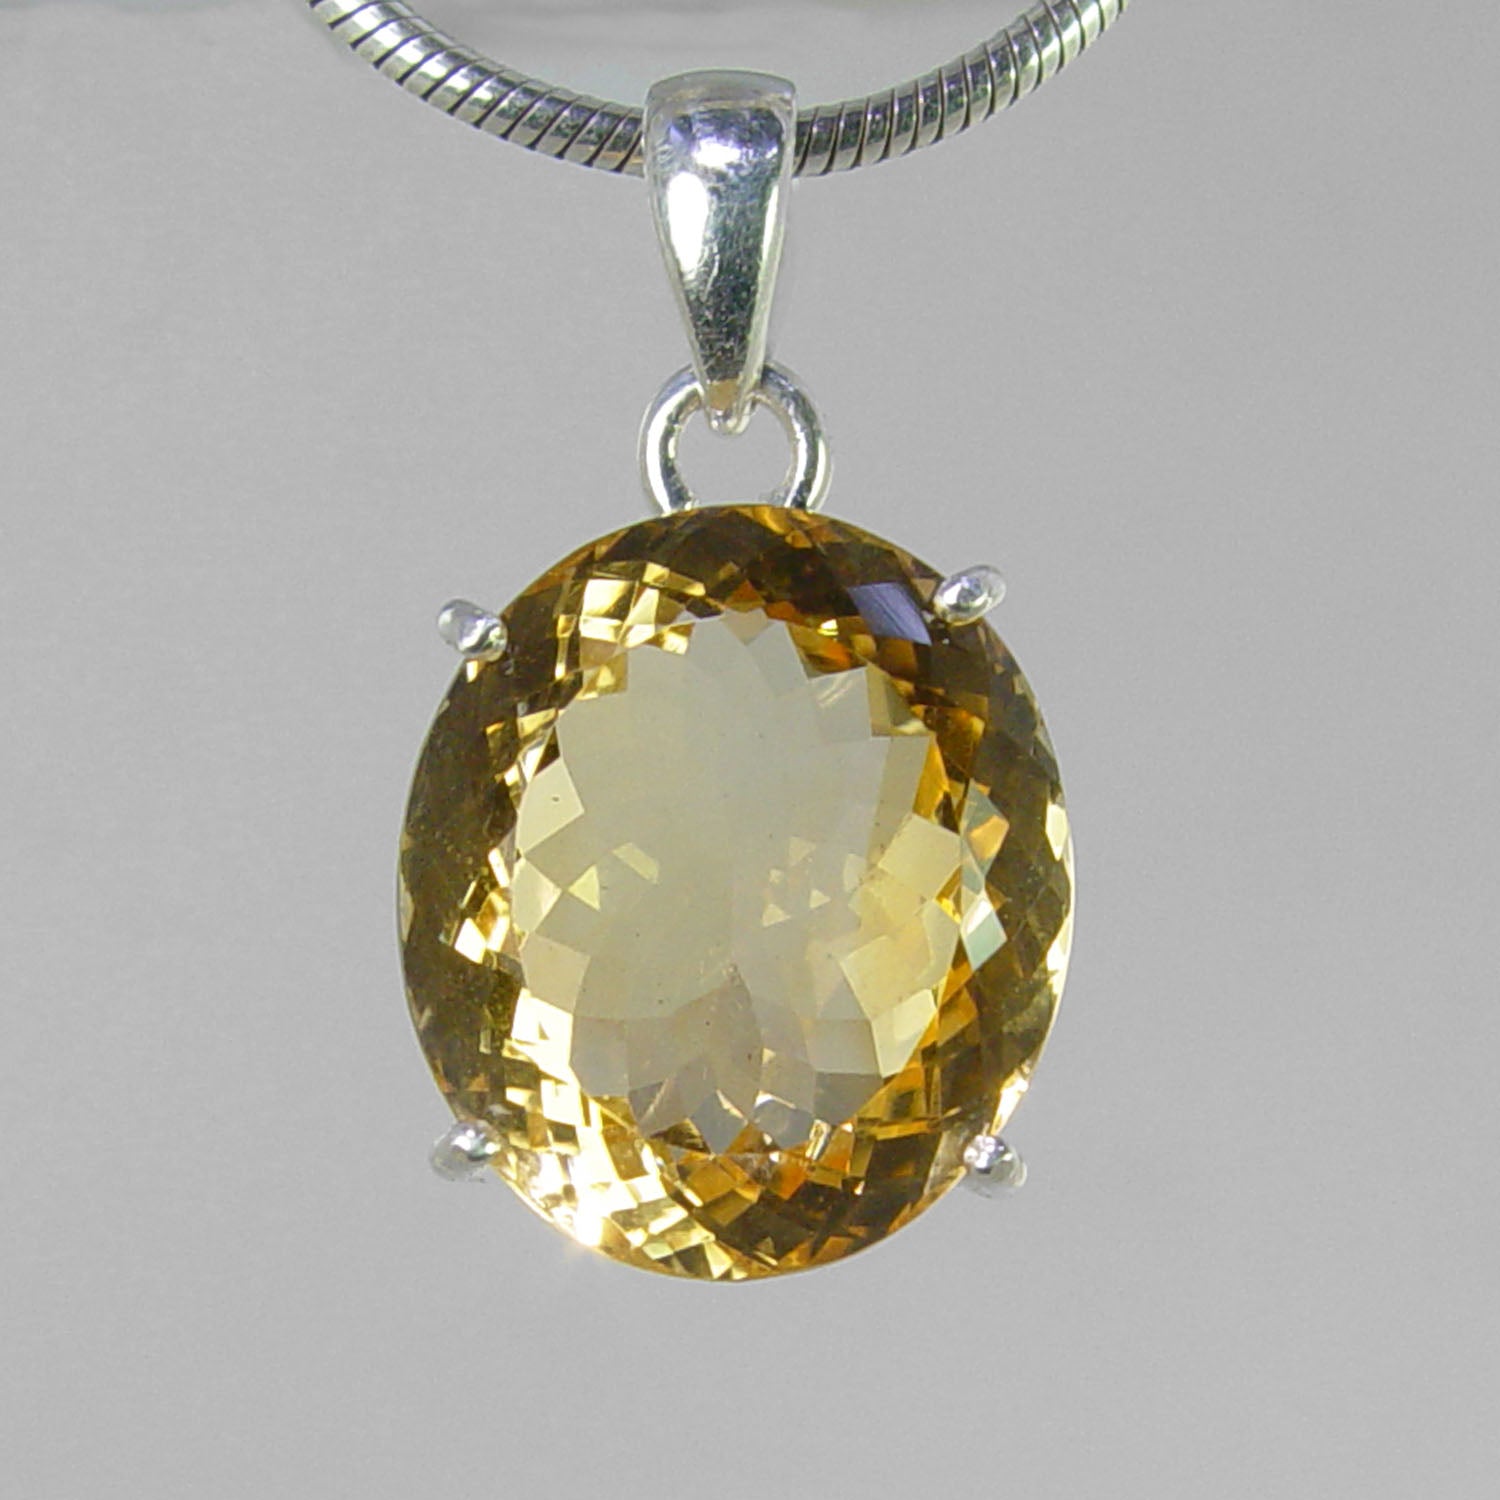 Citrine 23.3 ct Faceted Oval Sterling Silver Pendant